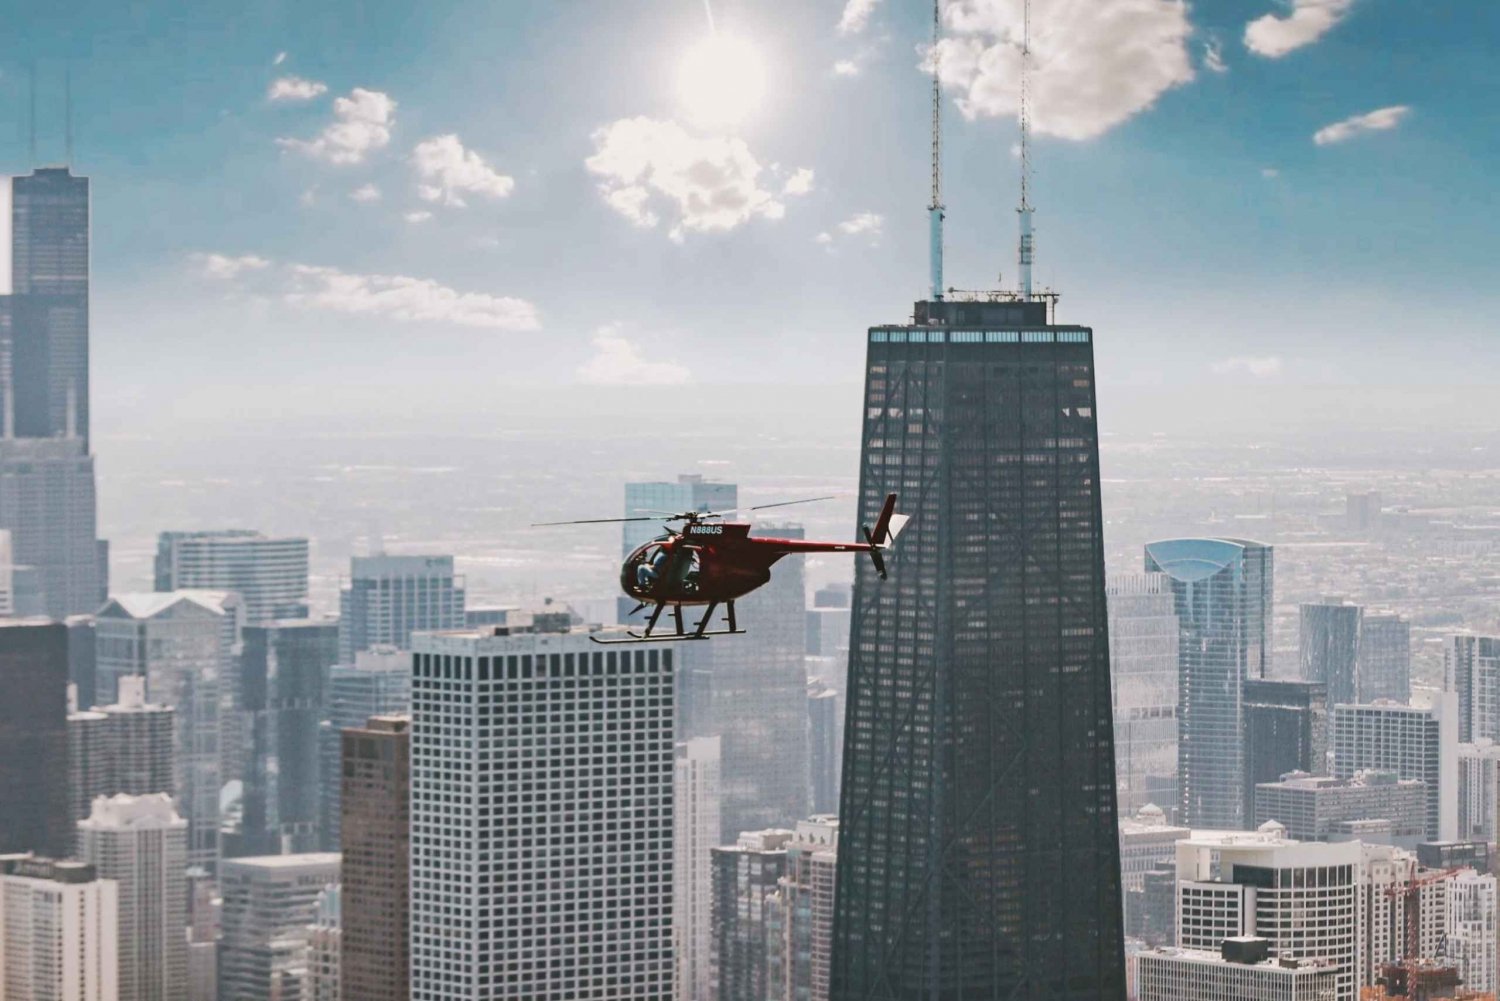 Chicago: 45-Minute Private Helicopter Flight for 1-3 People